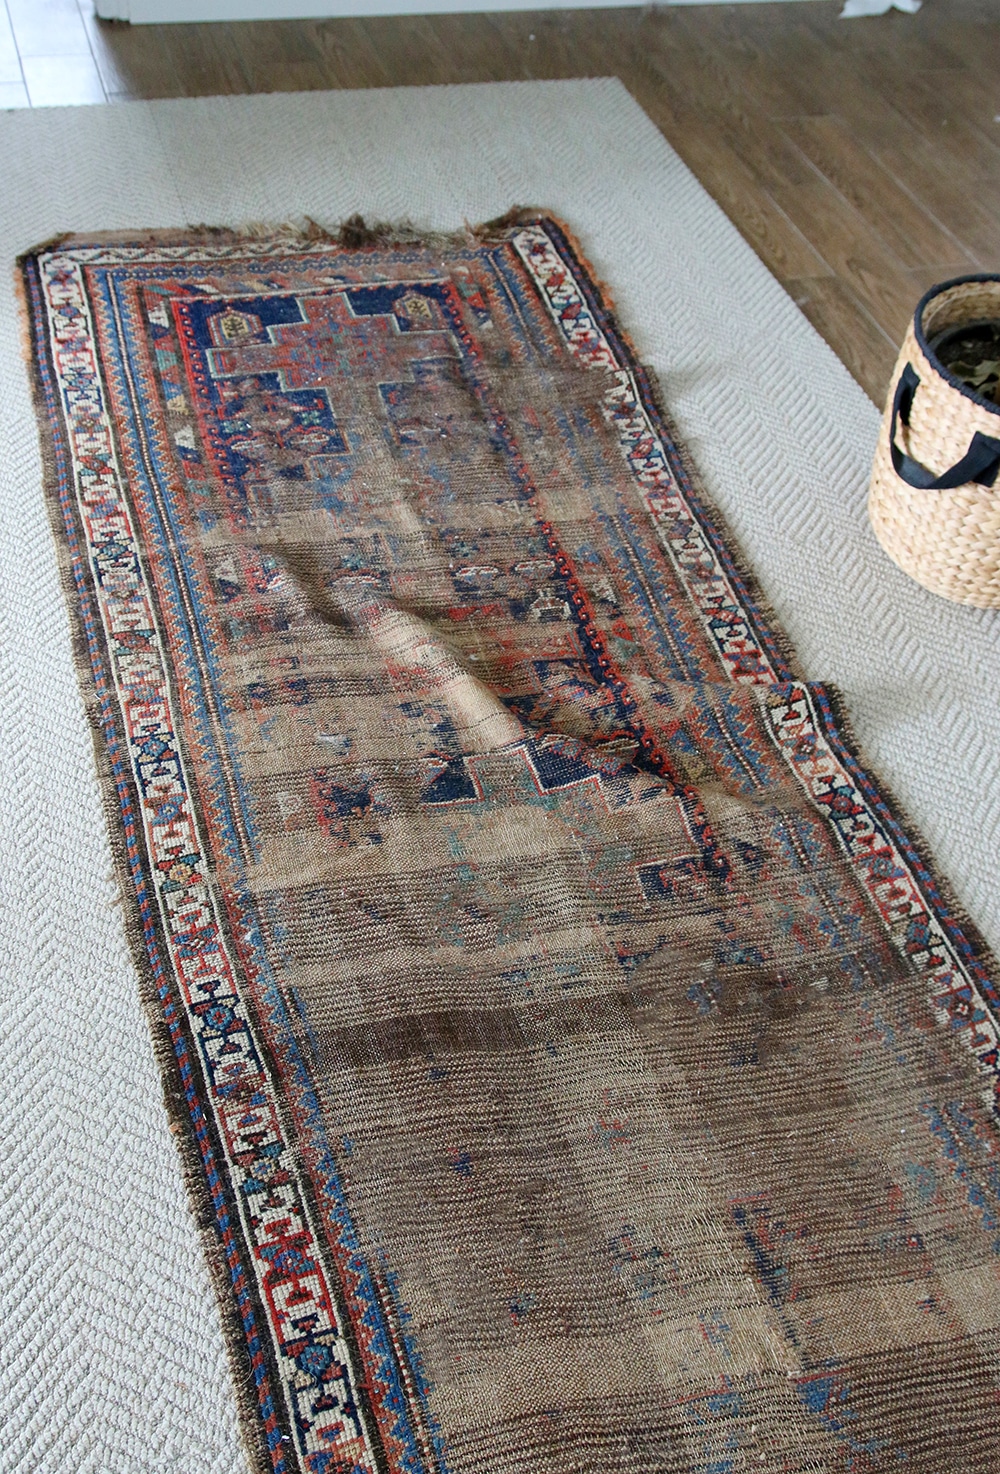 5 Tips For Keeping Area Rugs Exactly, Stop Rug Sliding On Wooden Floor